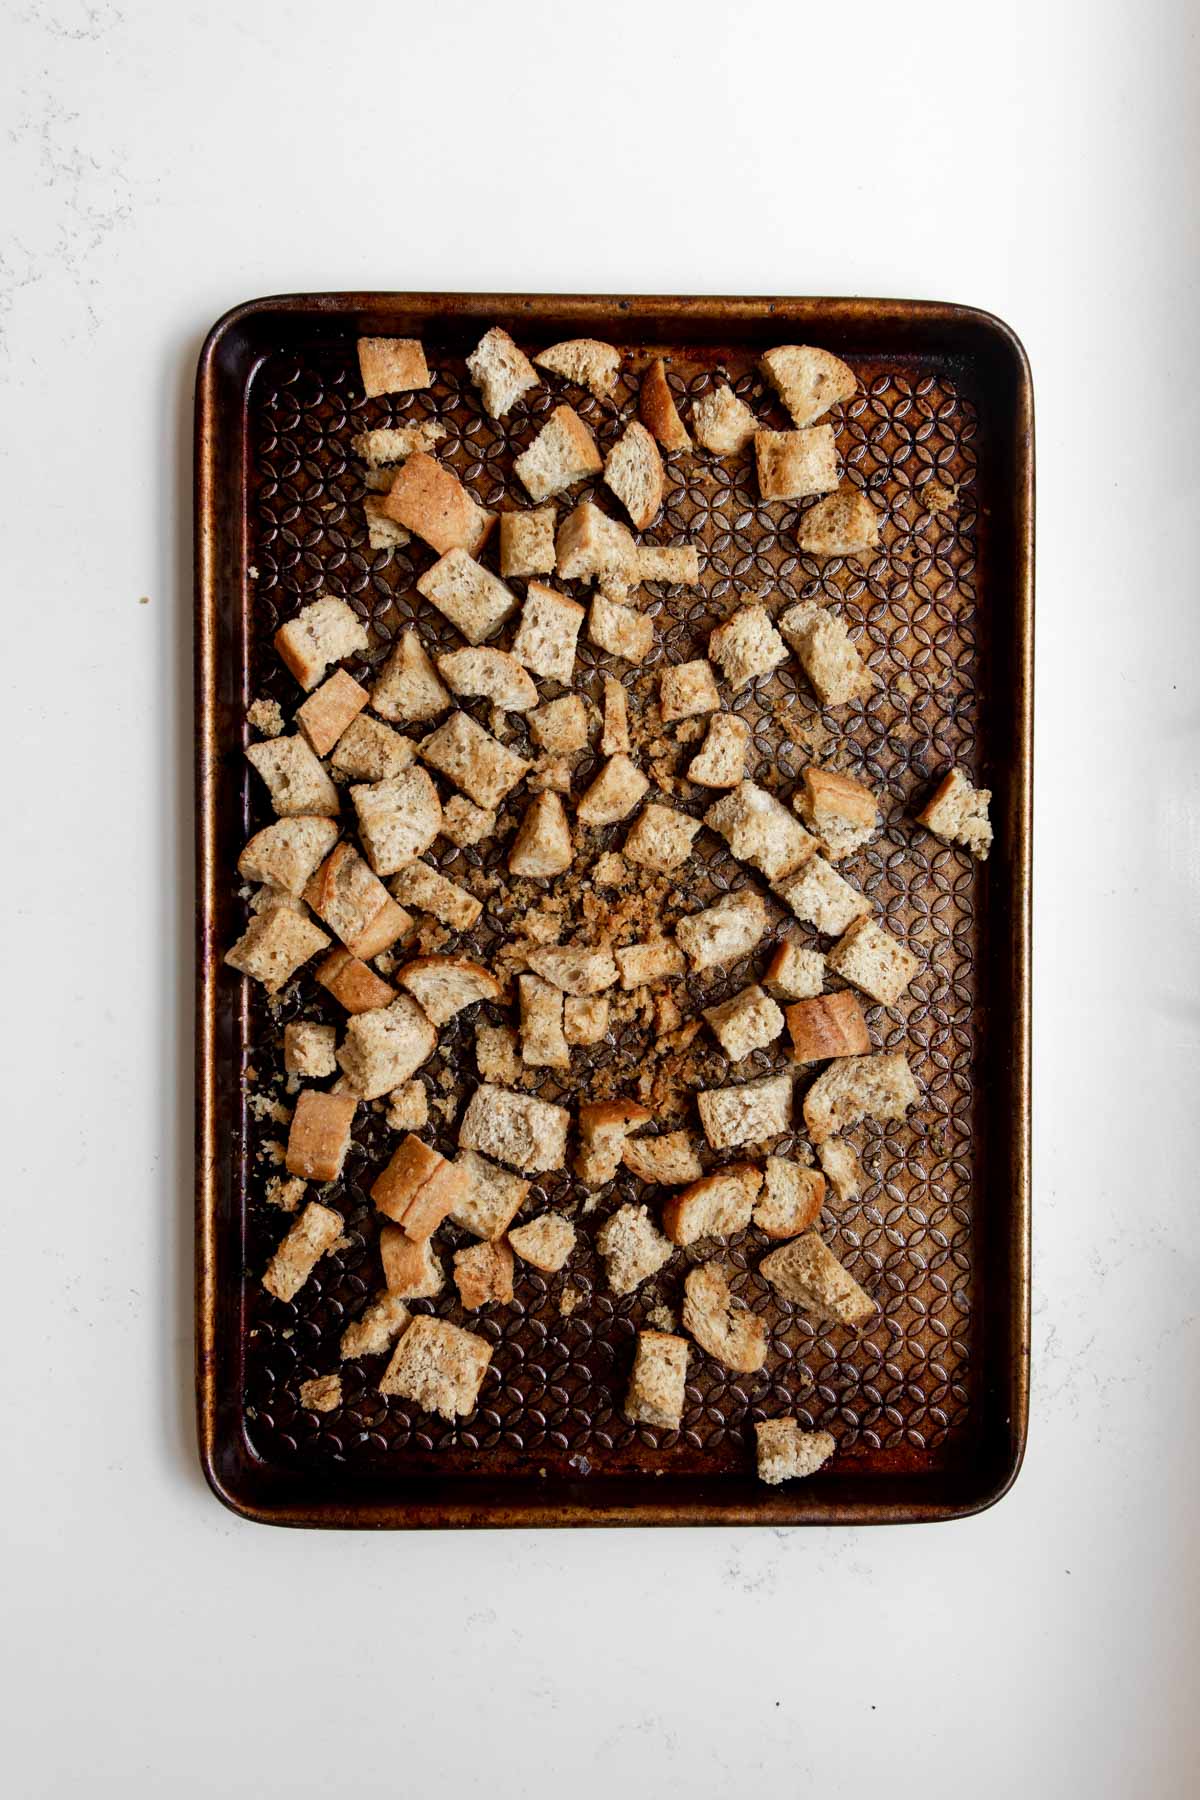 roasted croutons arranged on a baking sheet.